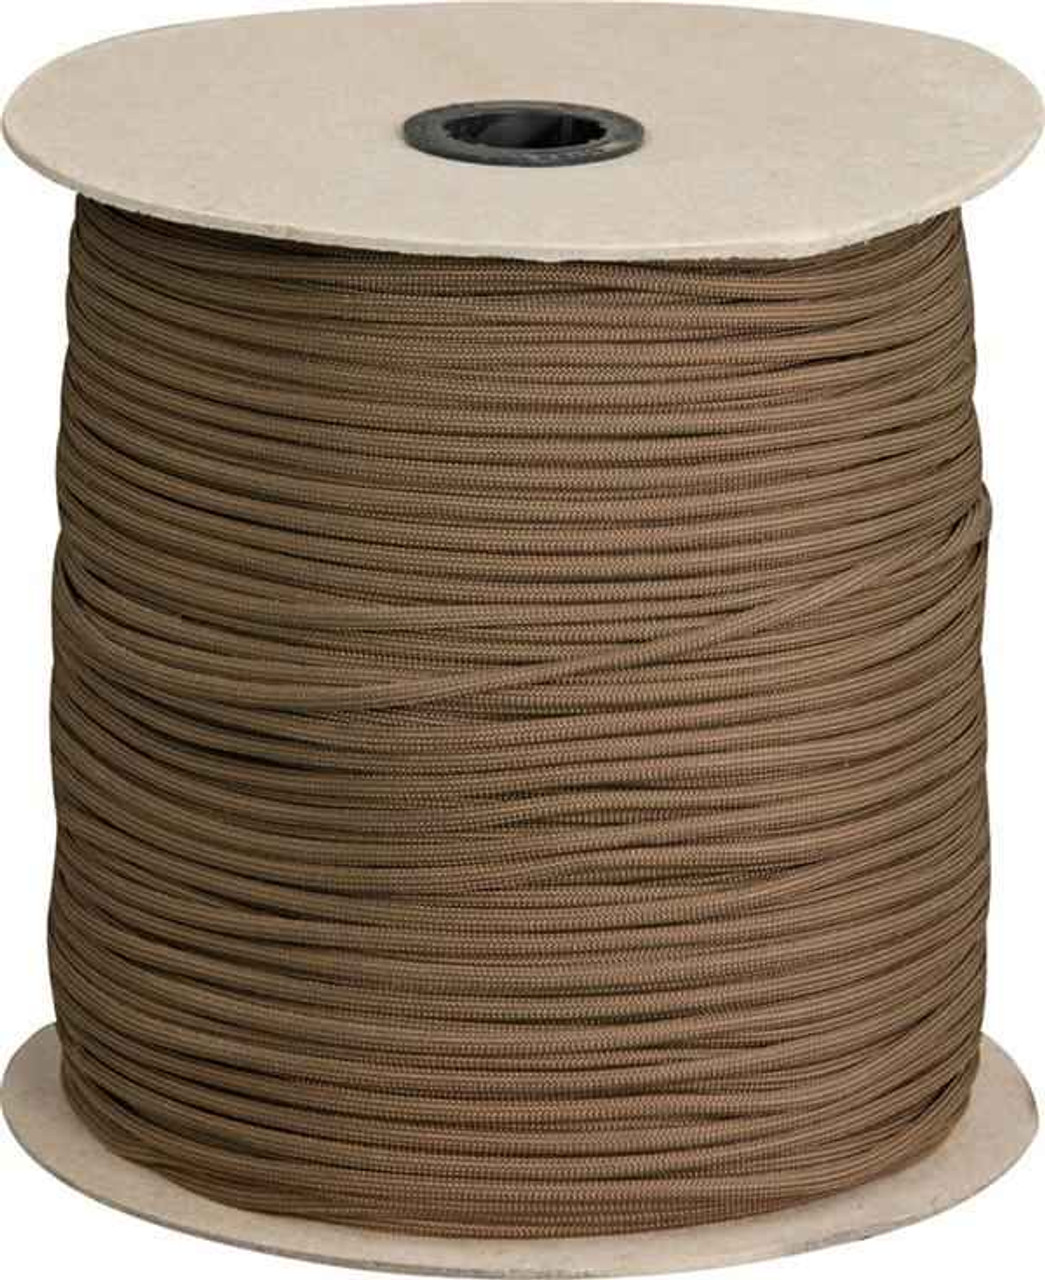 Parachute Cord,Brown, 1000ft. Length, 7 Strand